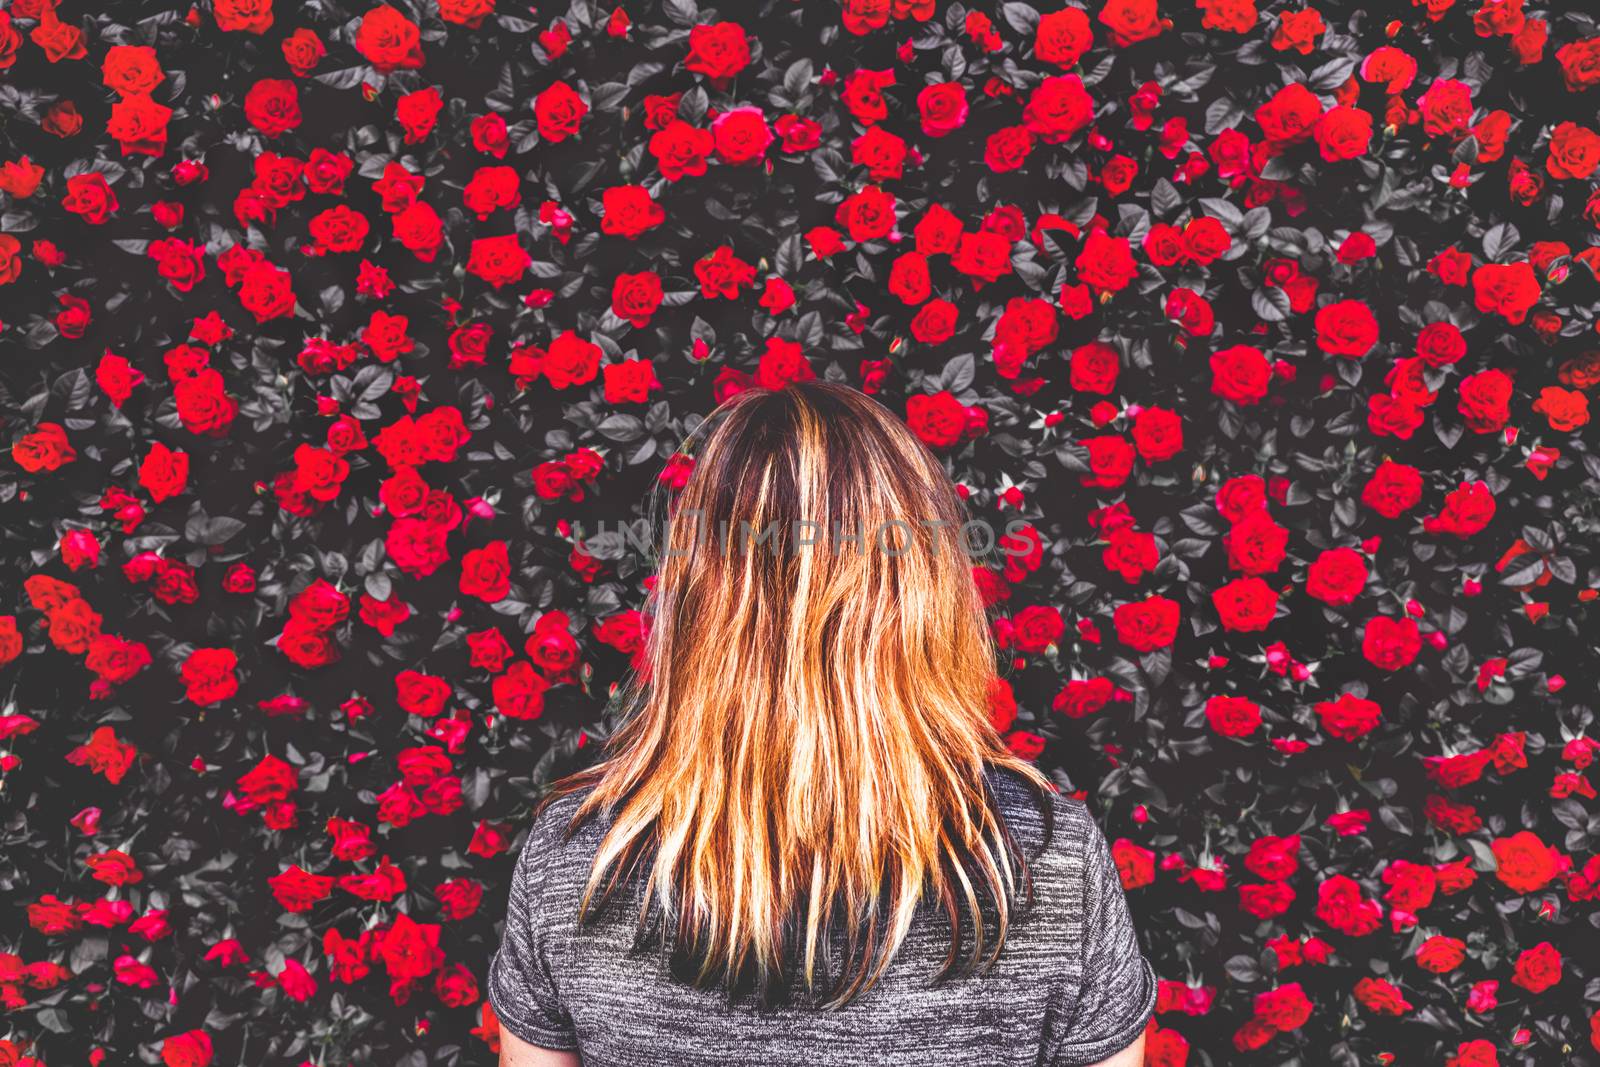 woman among red roses background by LucaLorenzelli